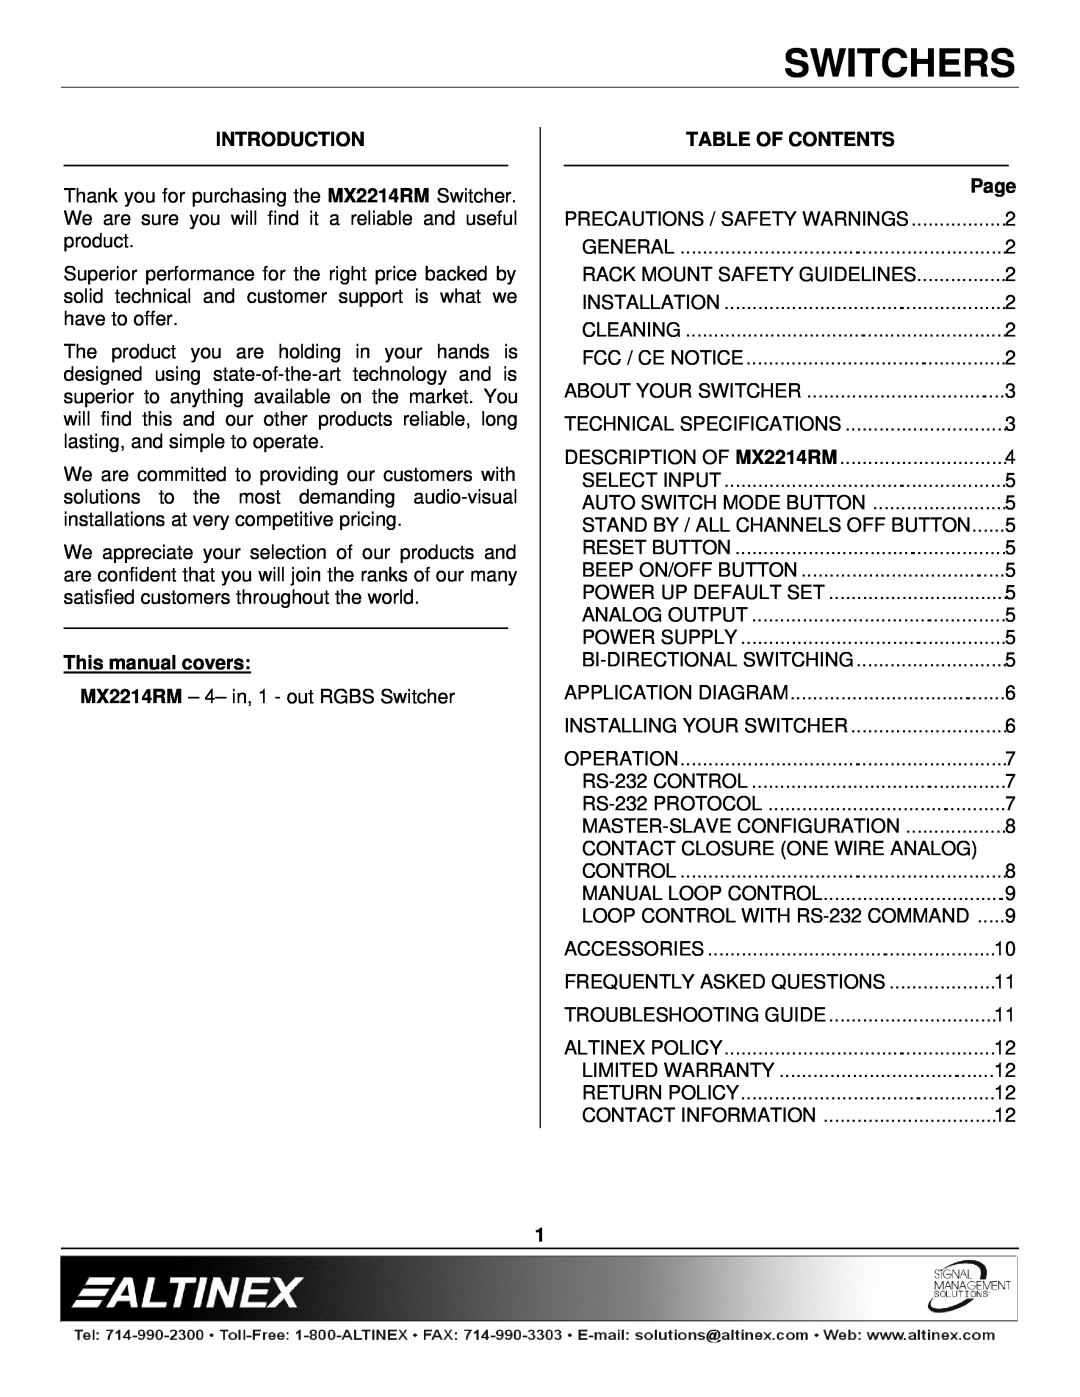 Altinex MX2214RM Introduction, This manual covers, Table Of Contents, Switchers 